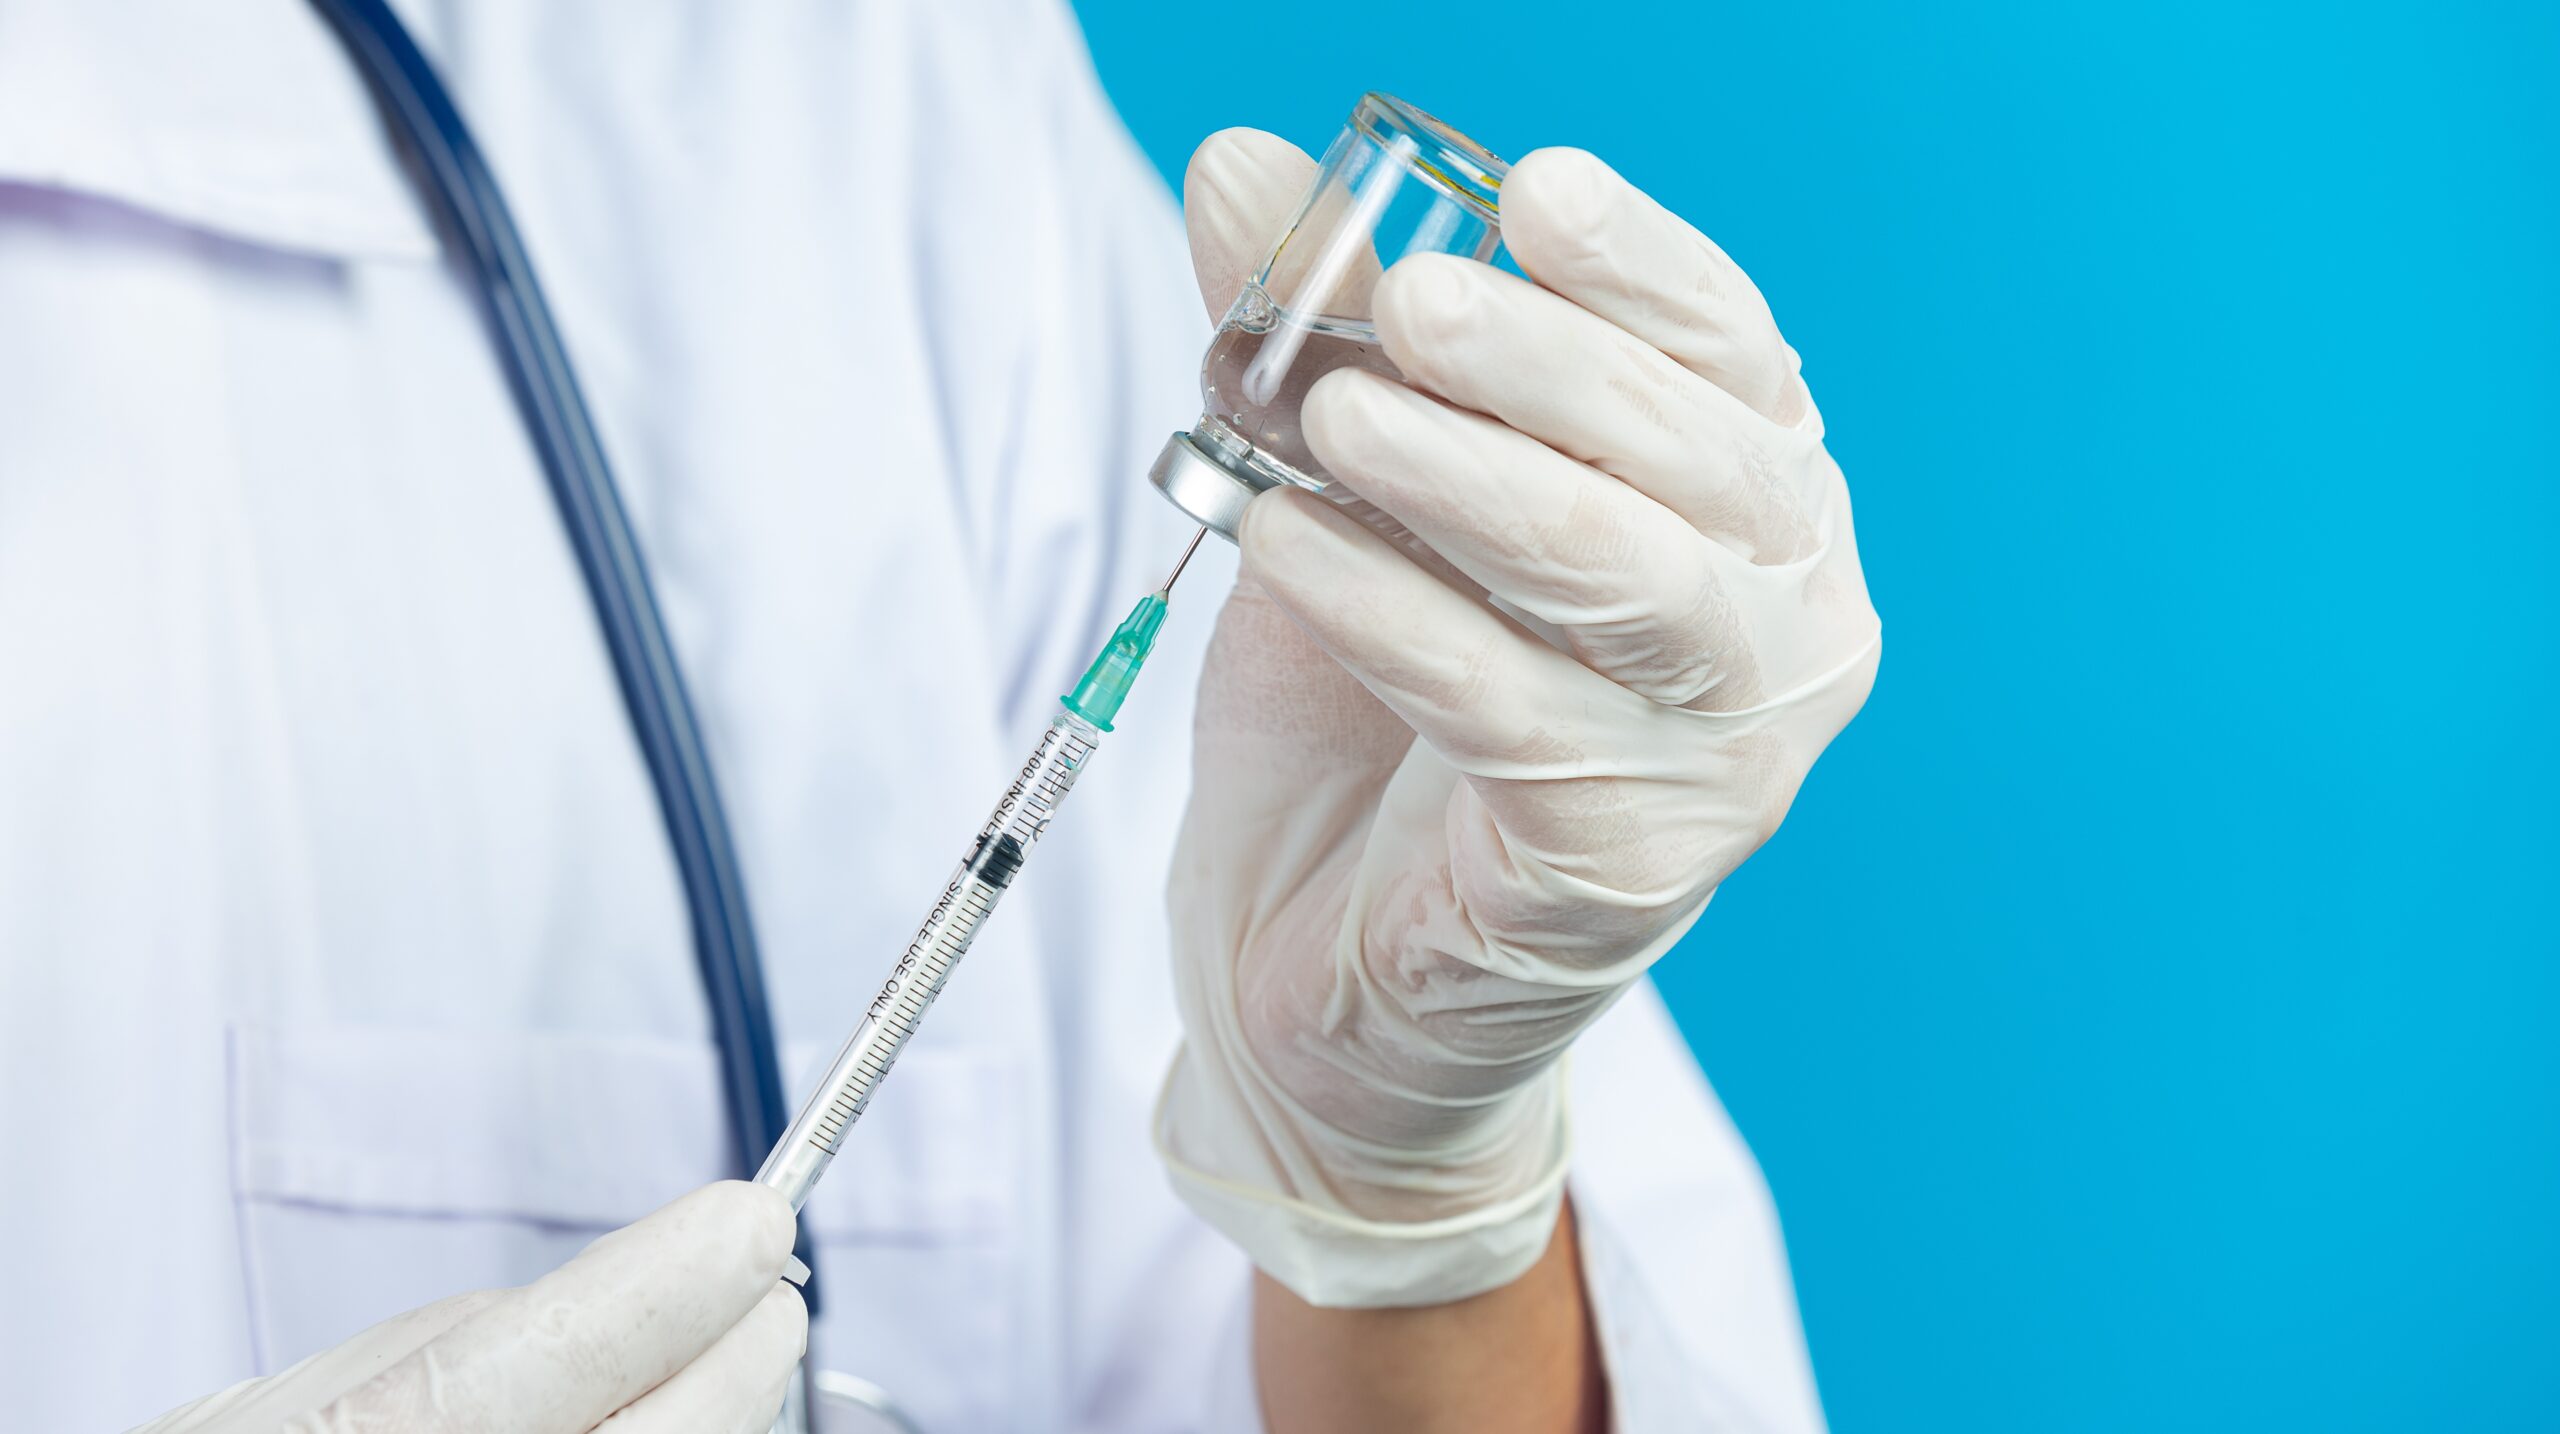 close up picture of docter’s  hands holding hypodermic syringe